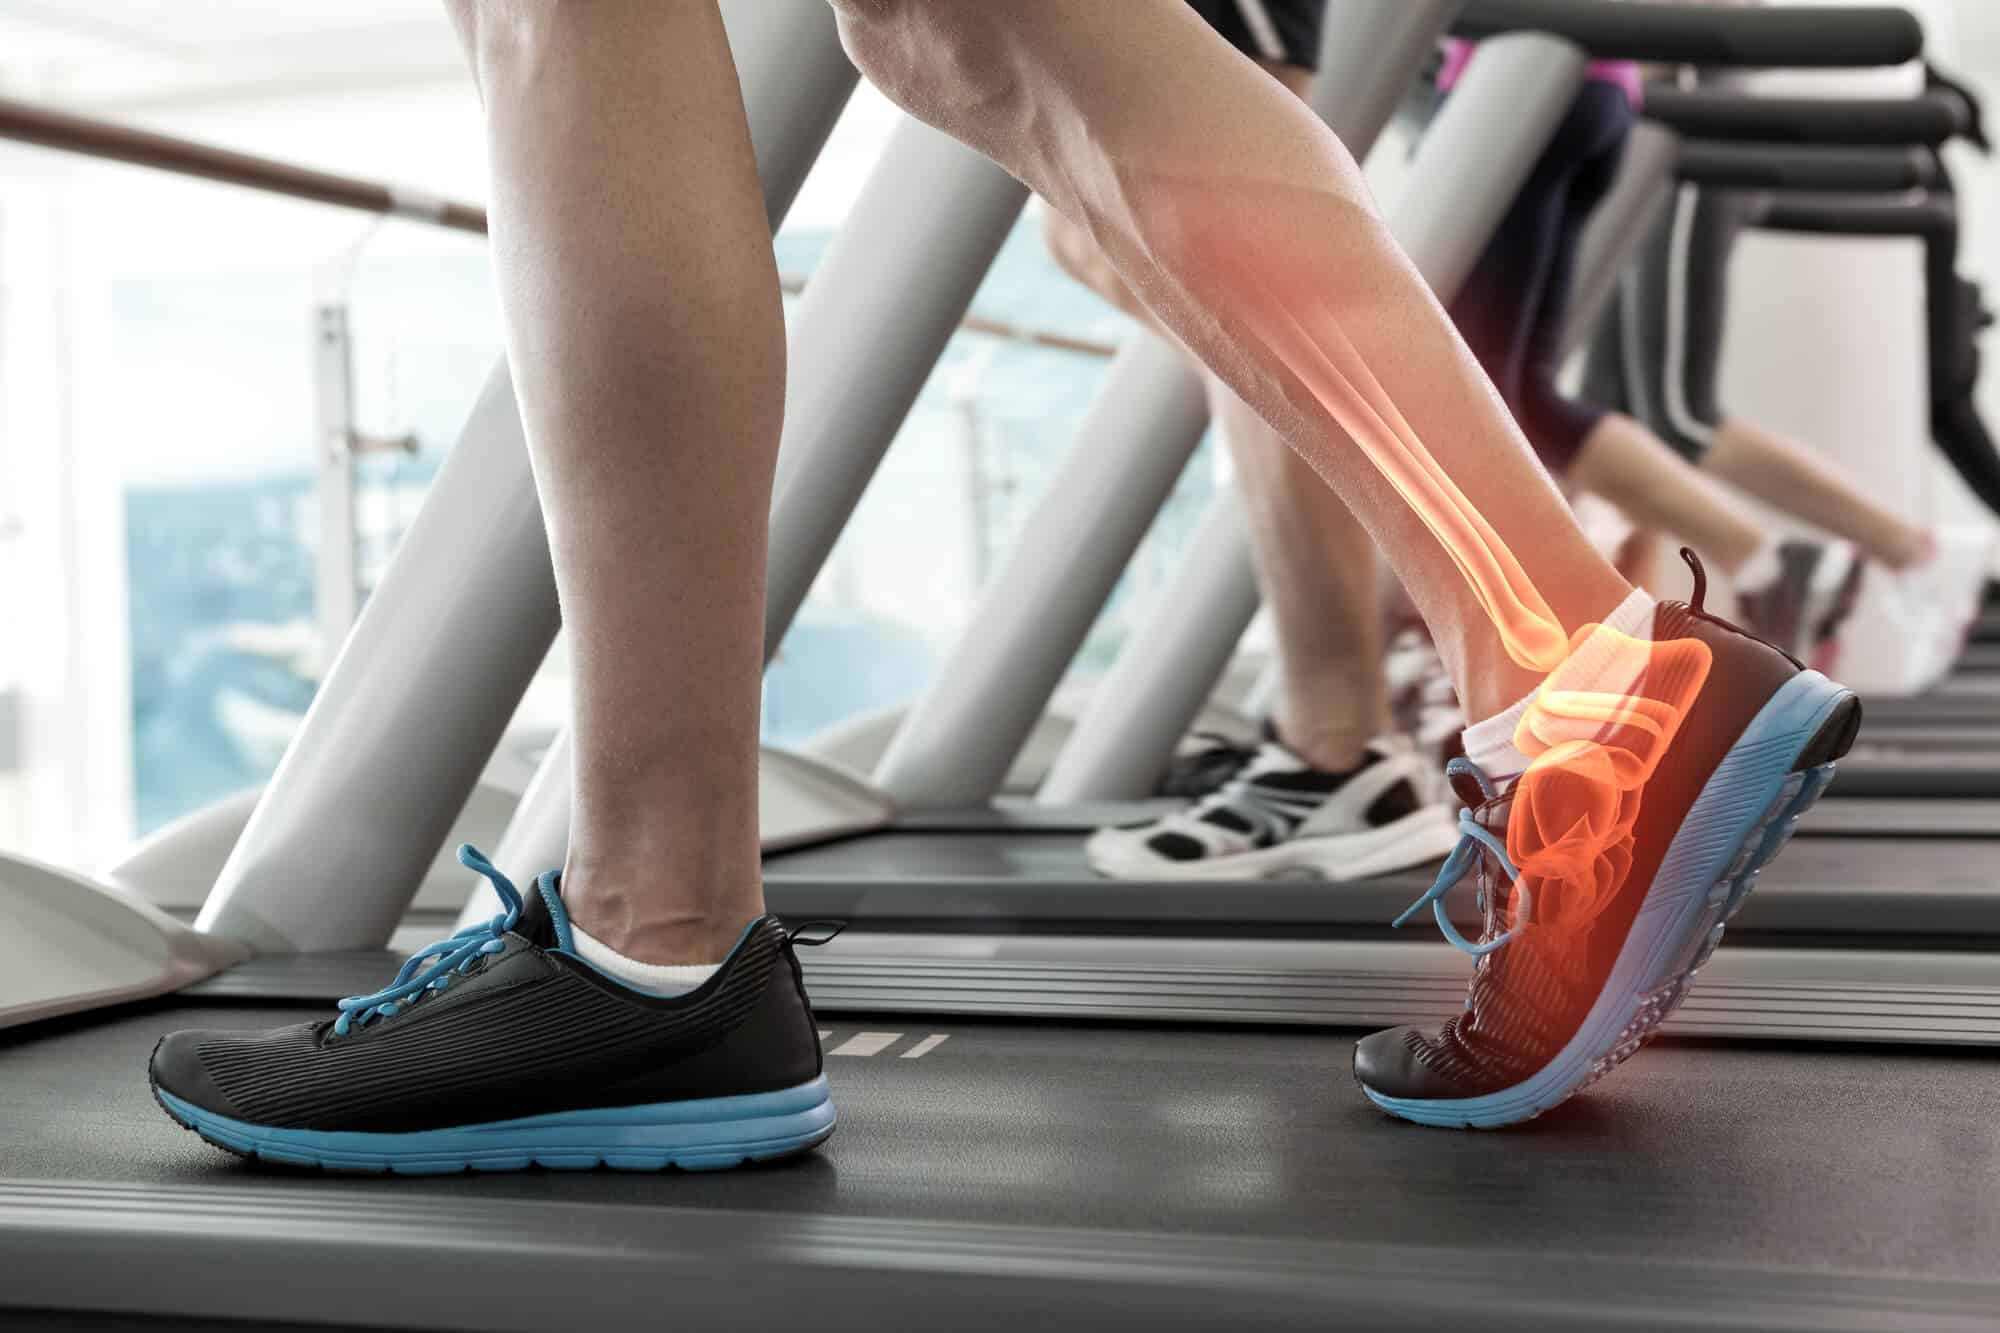 How Many Calories Do You Burn Running a Mile on a Treadmill: It's more forgiving on the joints